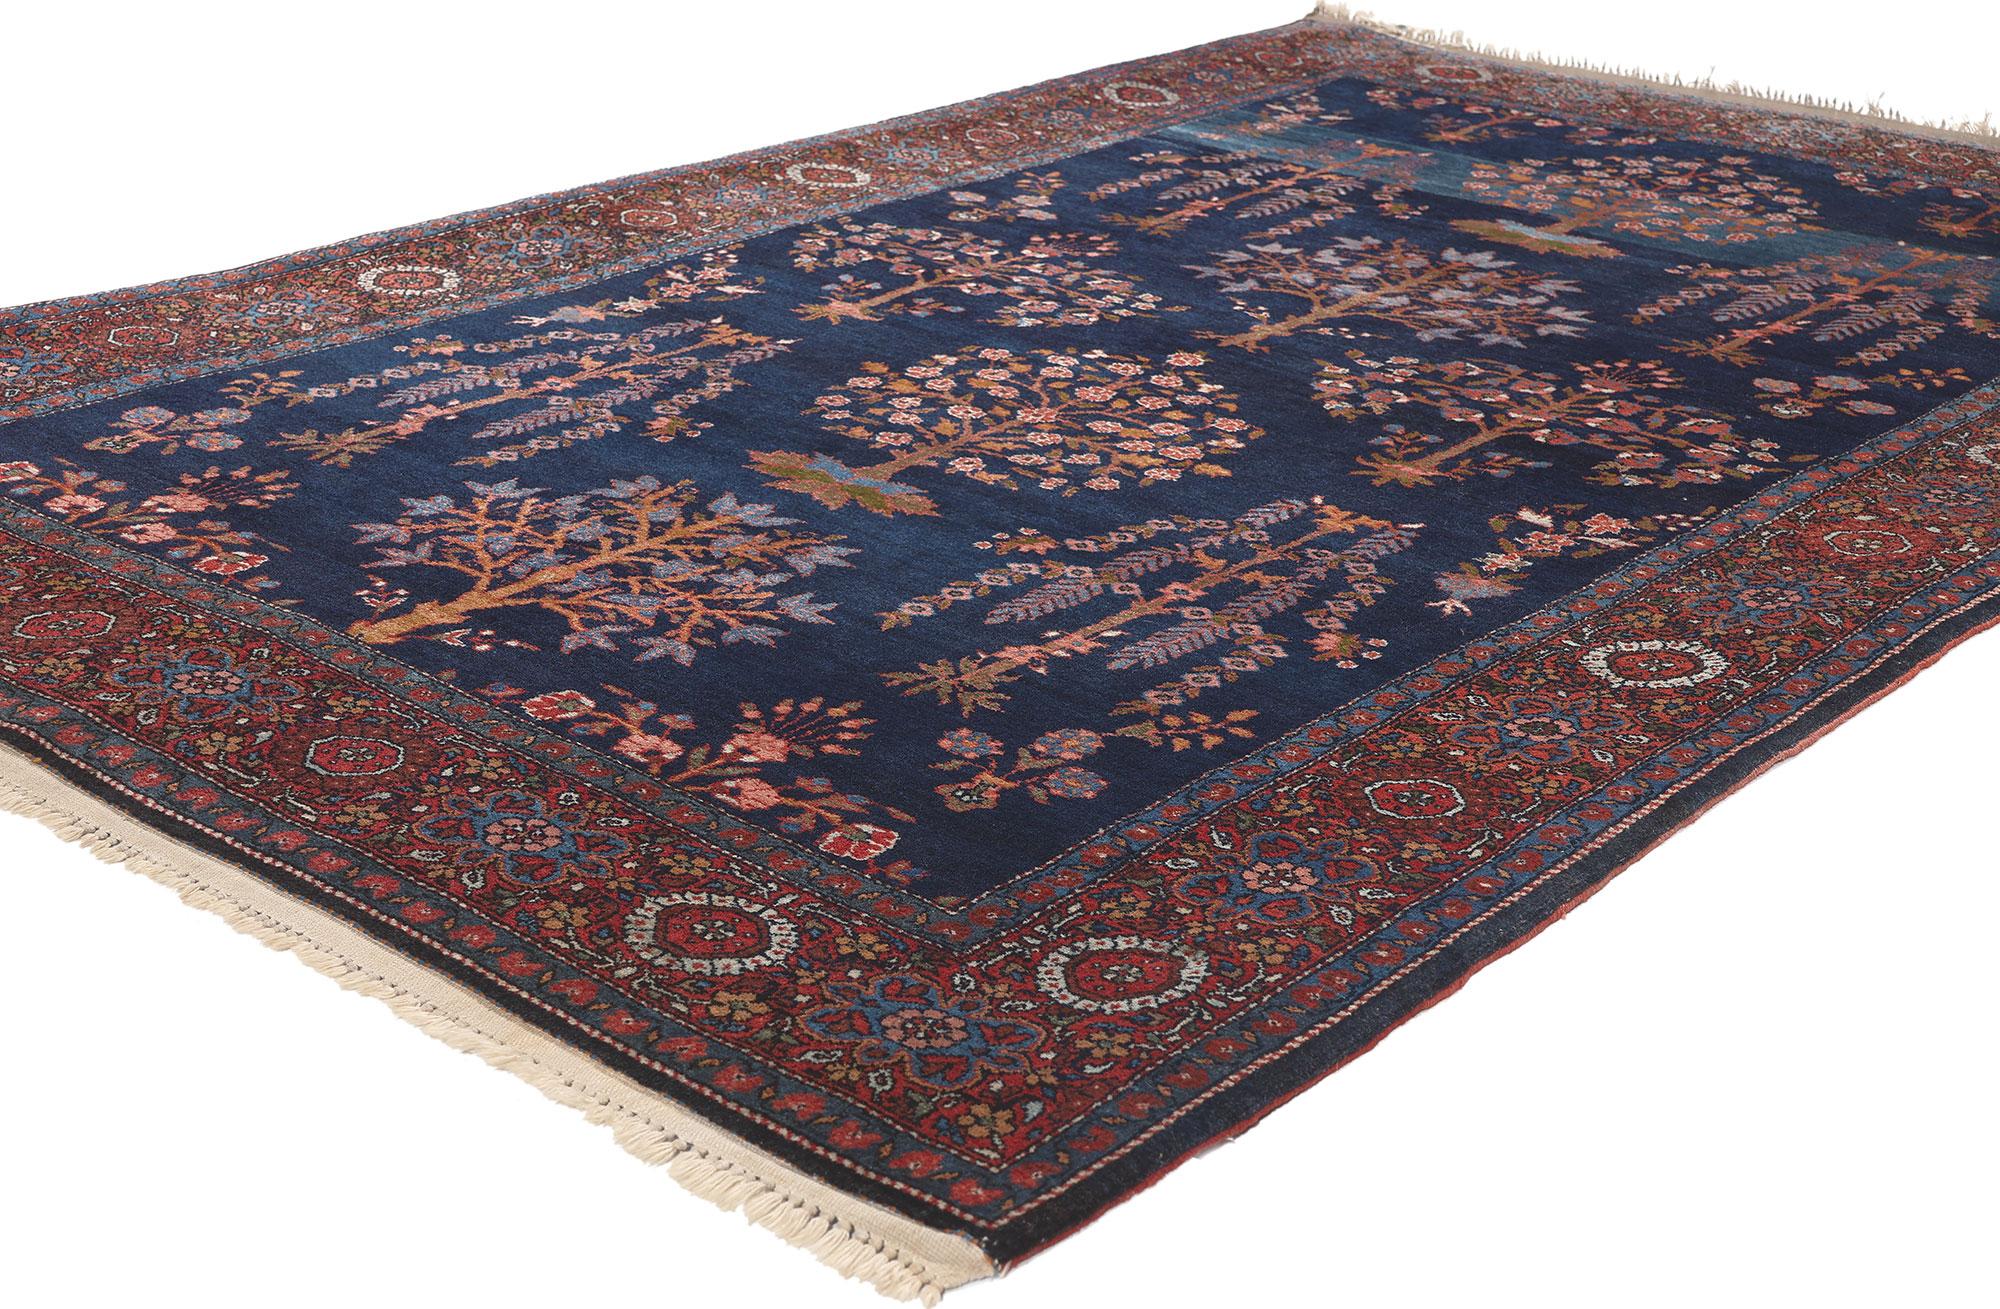 78561 Antique Persian Sarouk Farahan Rug, 04'00 x 06'05.
Emanating timeless appeal with incredible detail and lavish texture, this hand knotted wool antique Persian Sarouk Farahan rug is a captivating vision of woven beauty.  The decorative